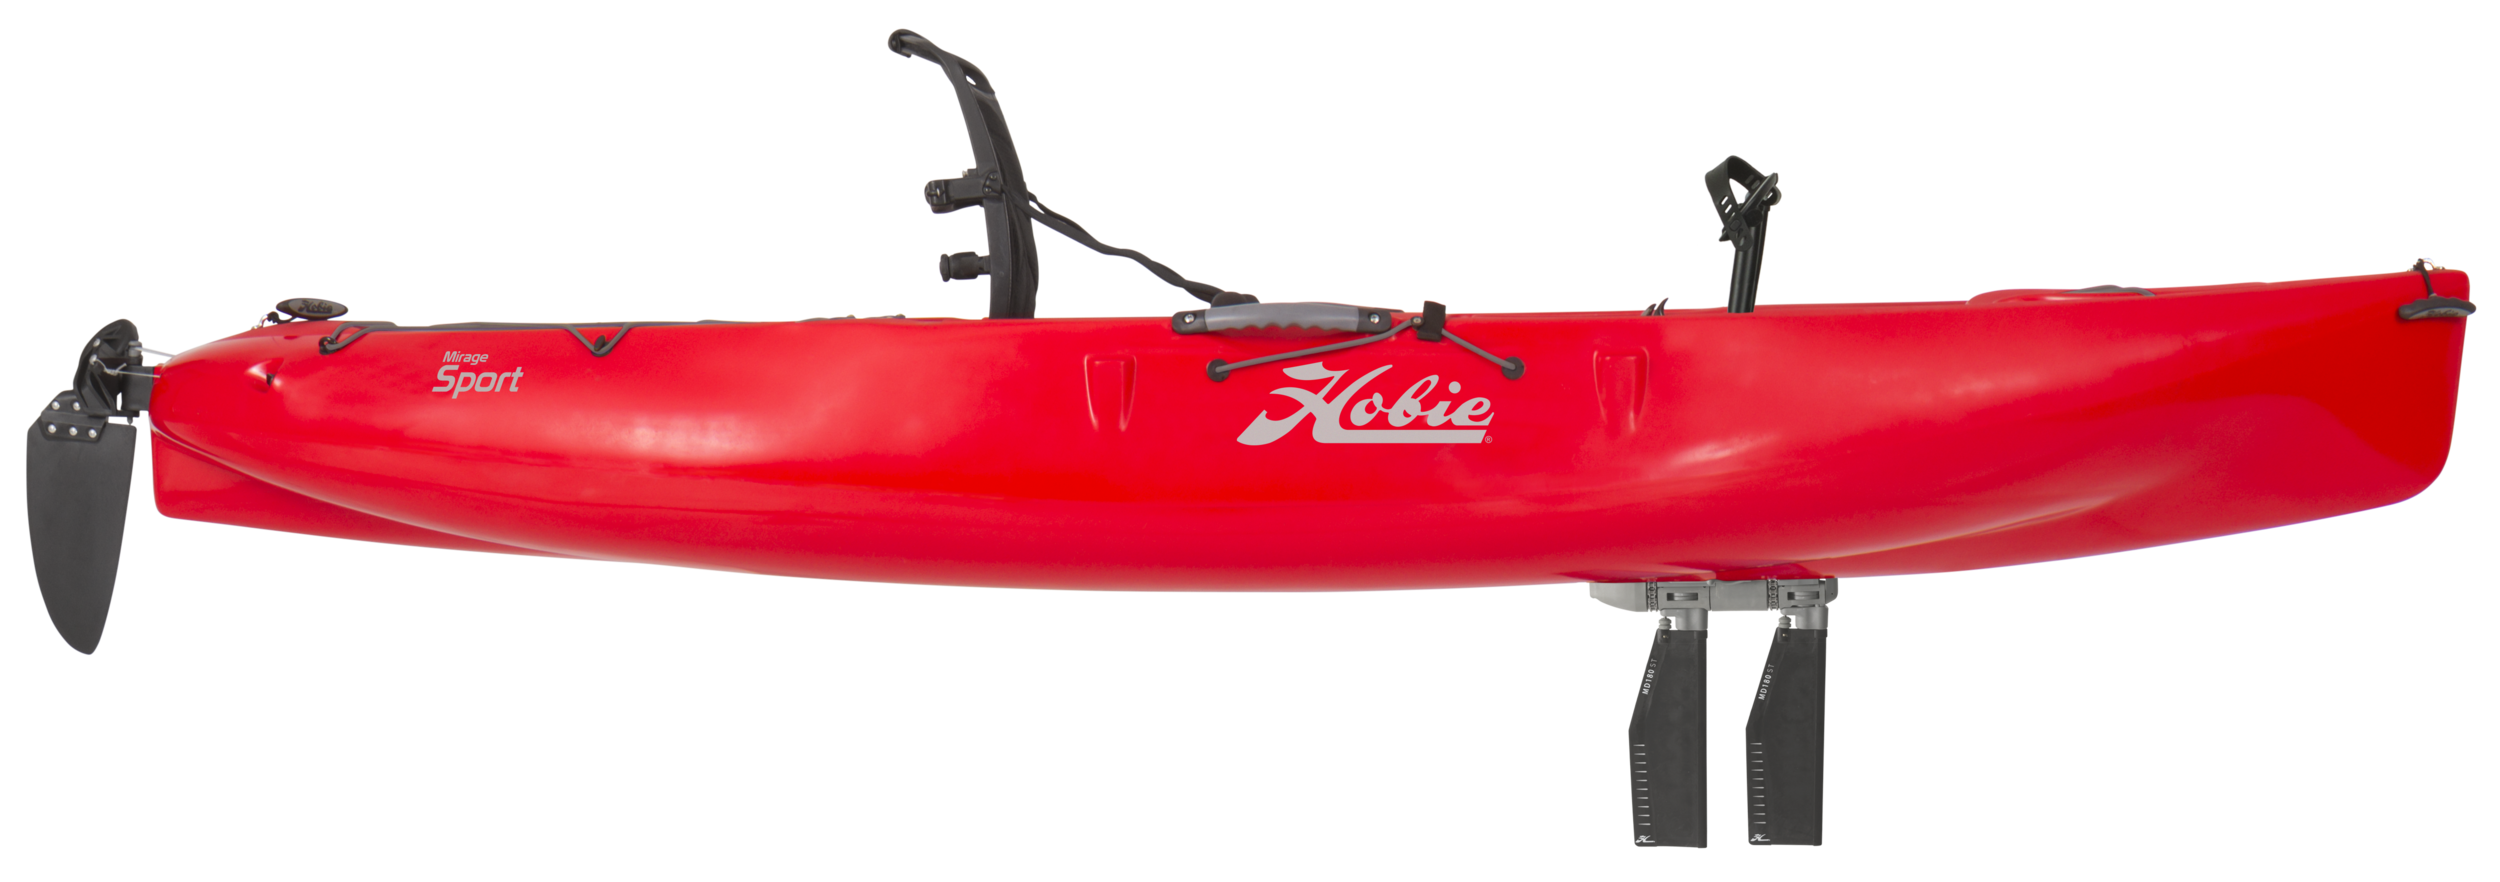 Sport_studio_red_sideview_2018_full.png